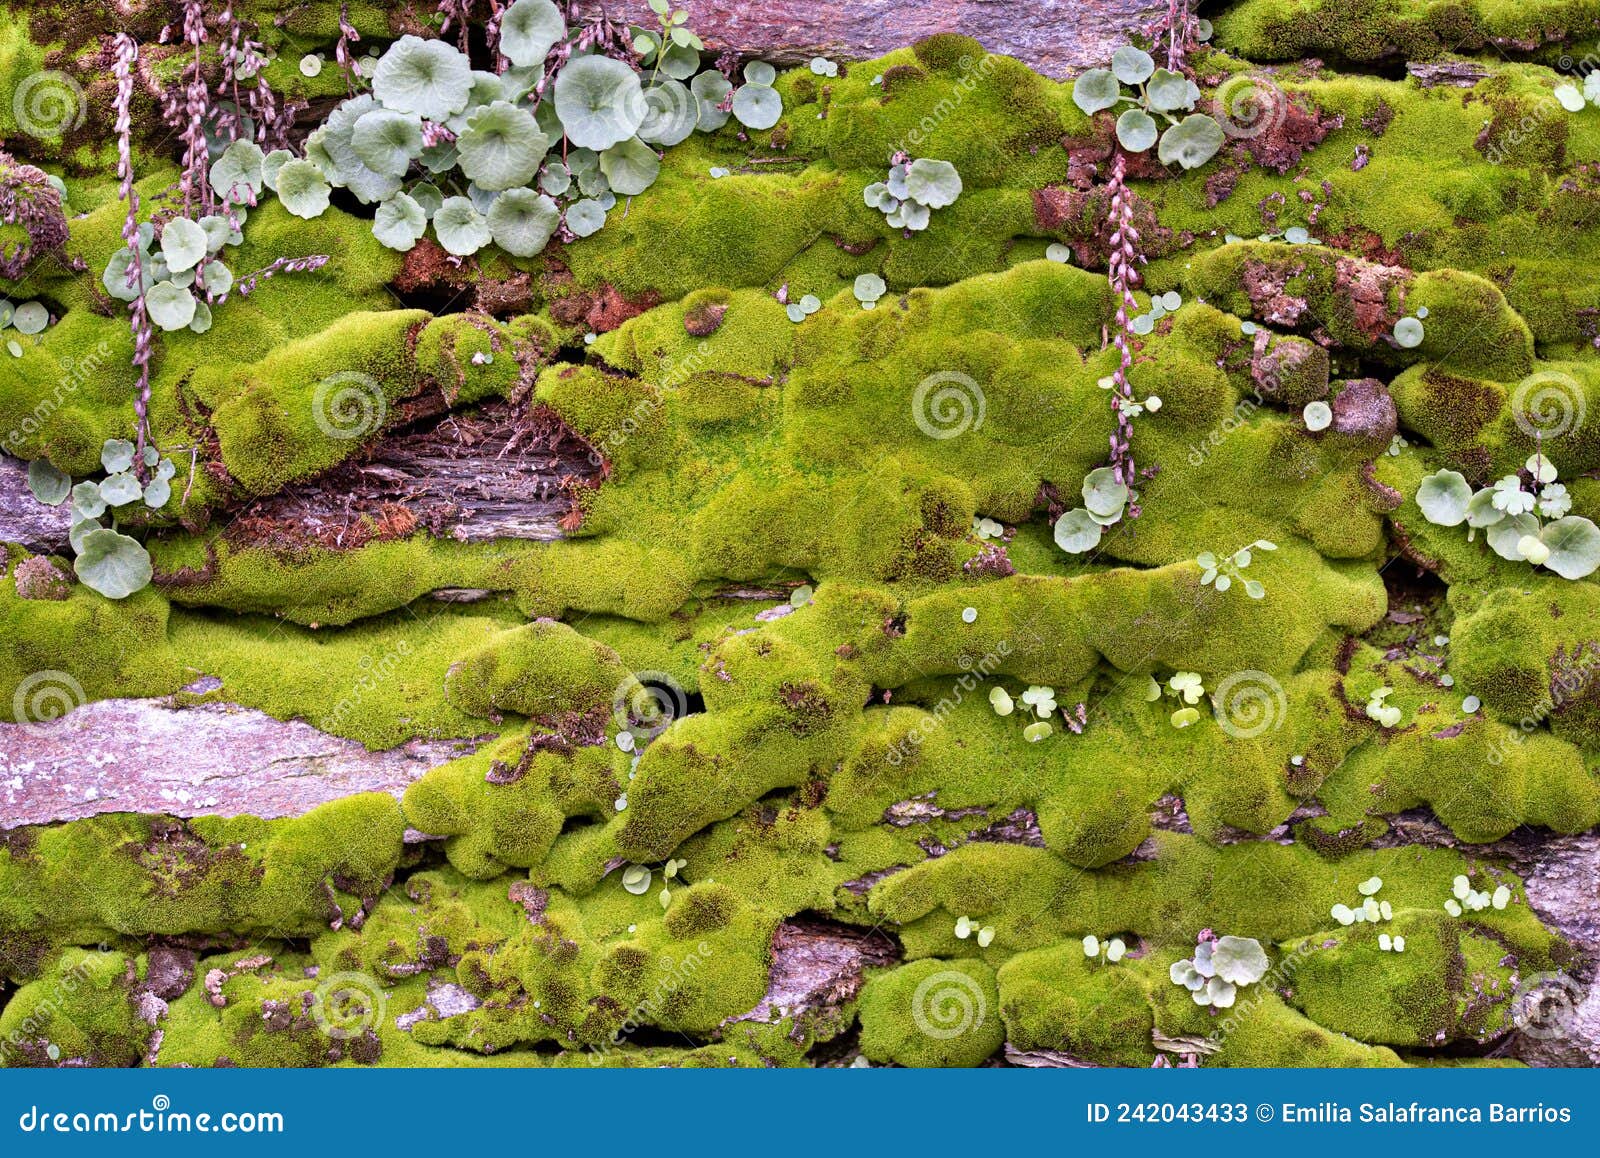 wild moss with small plants and rock